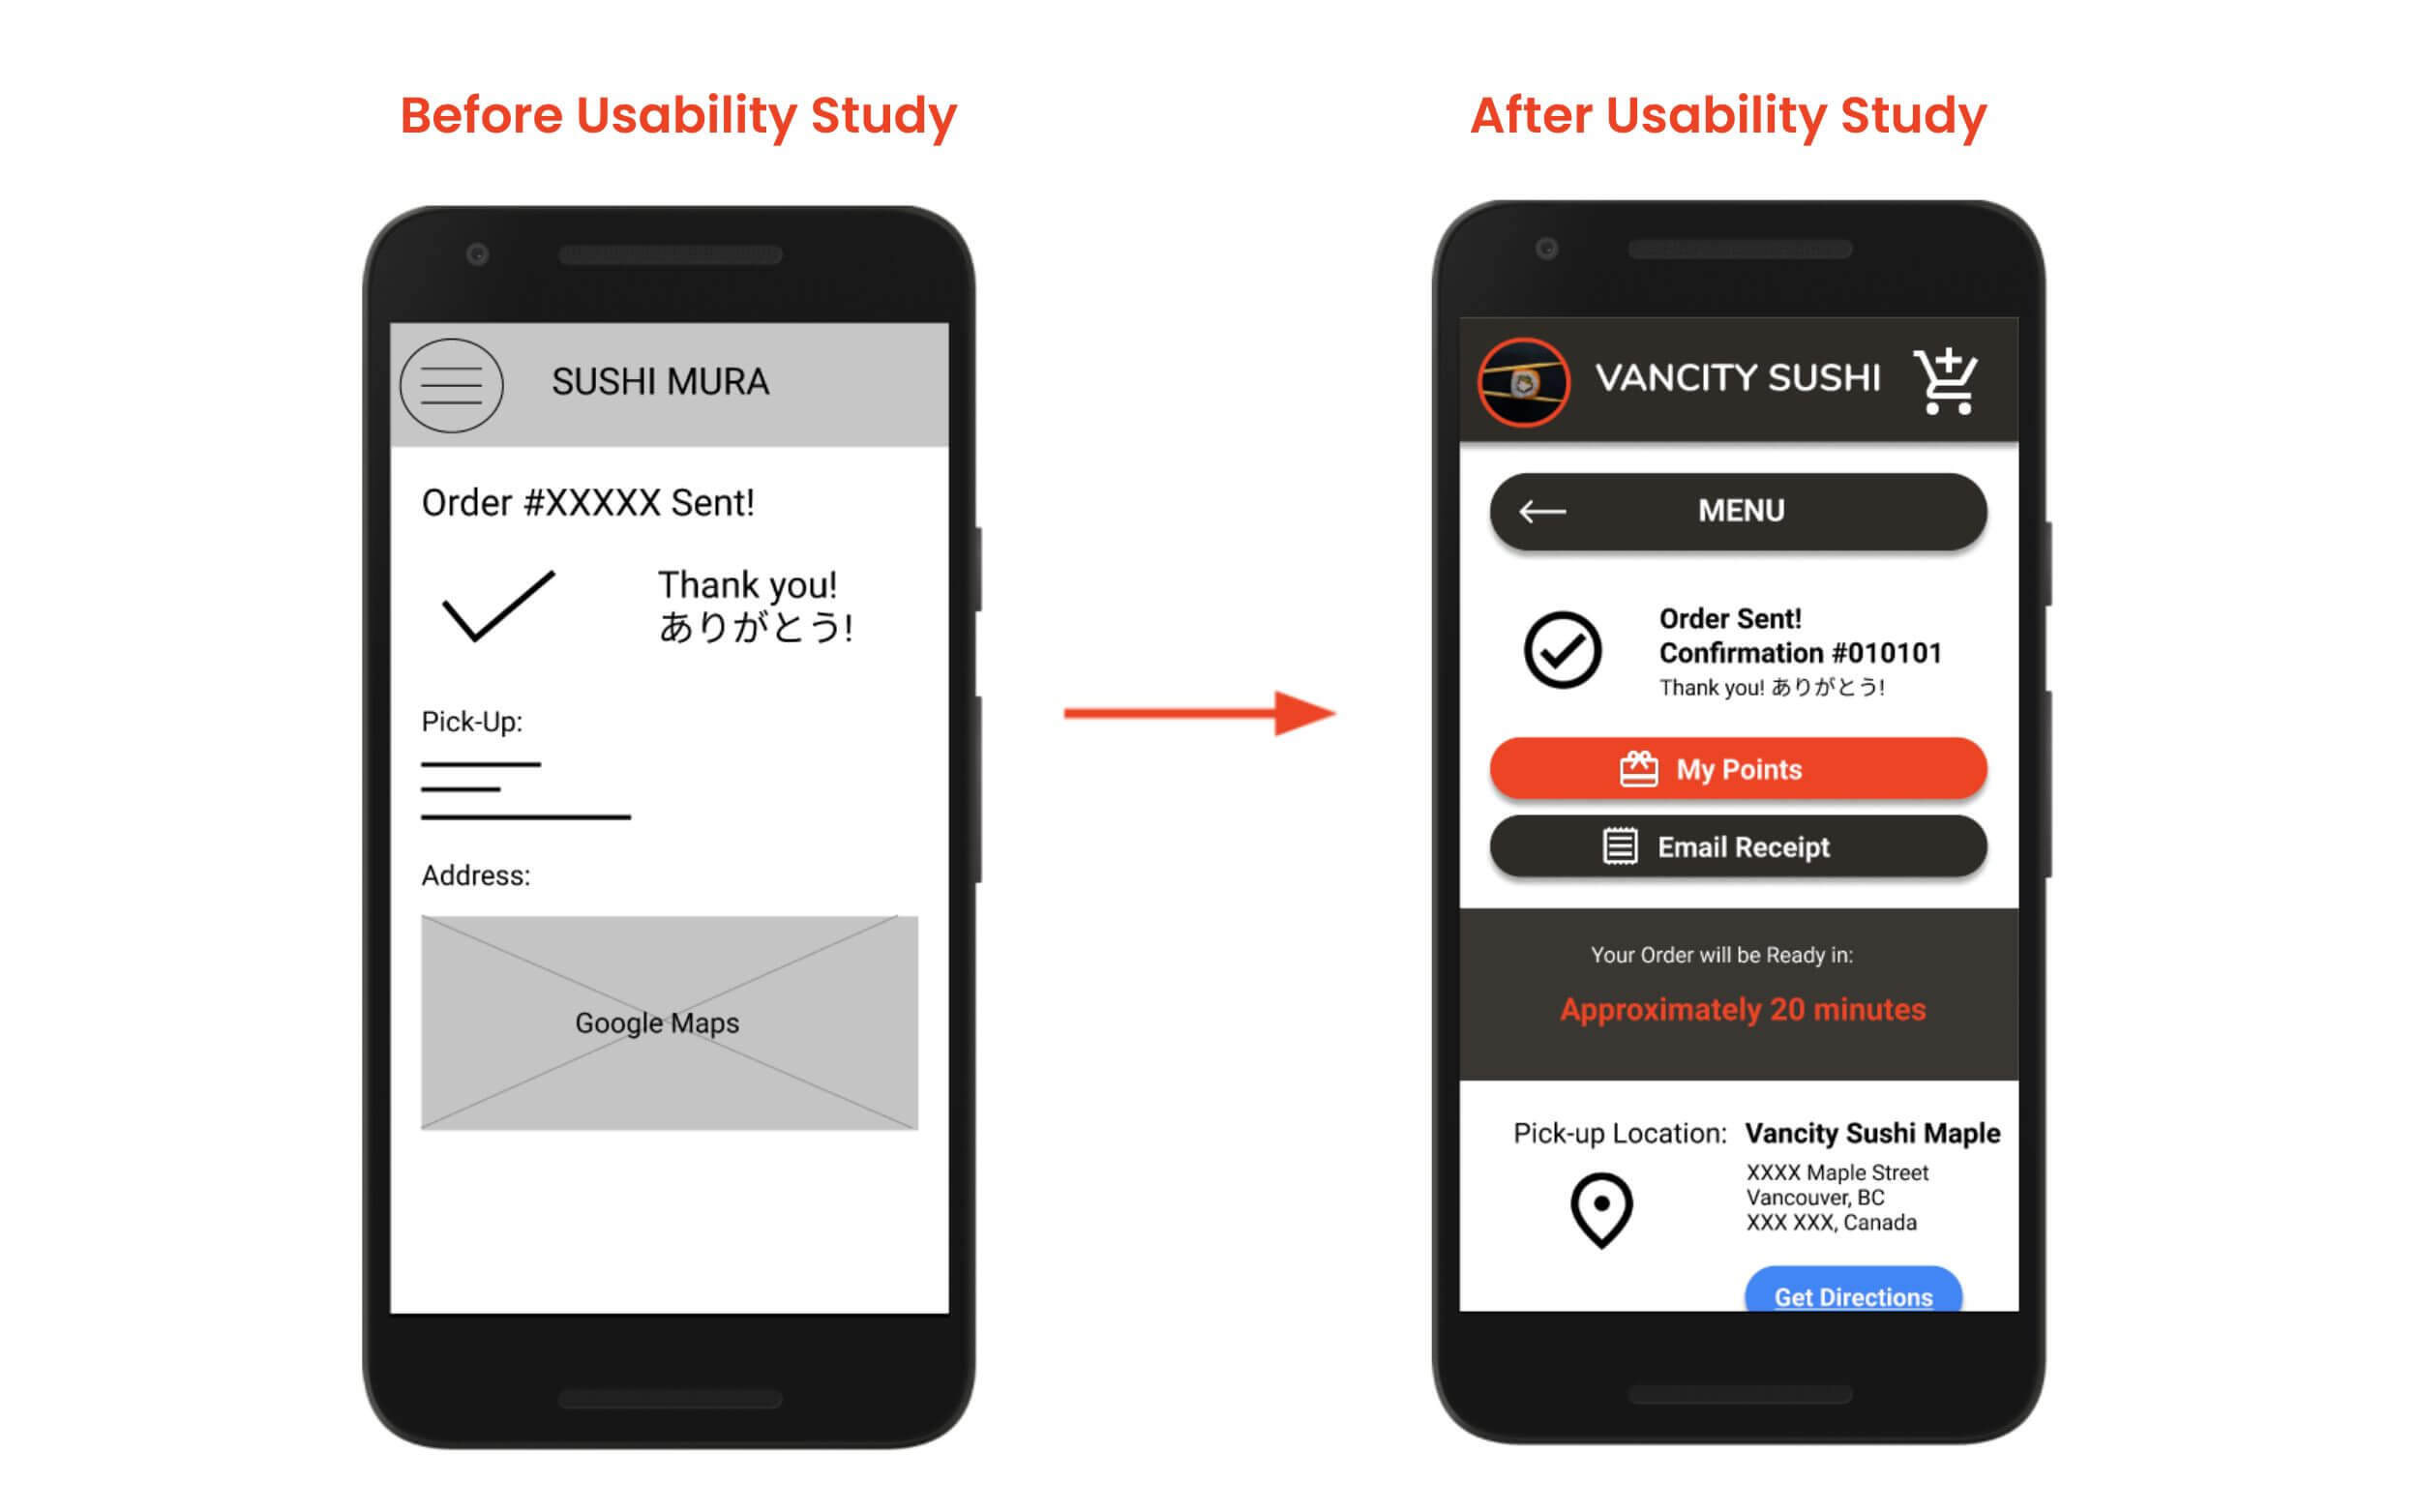 Before and After screenshots of Vancity Sushi's order confirmation screen with and without call-to-action buttons, estimated order completion time, and location details.